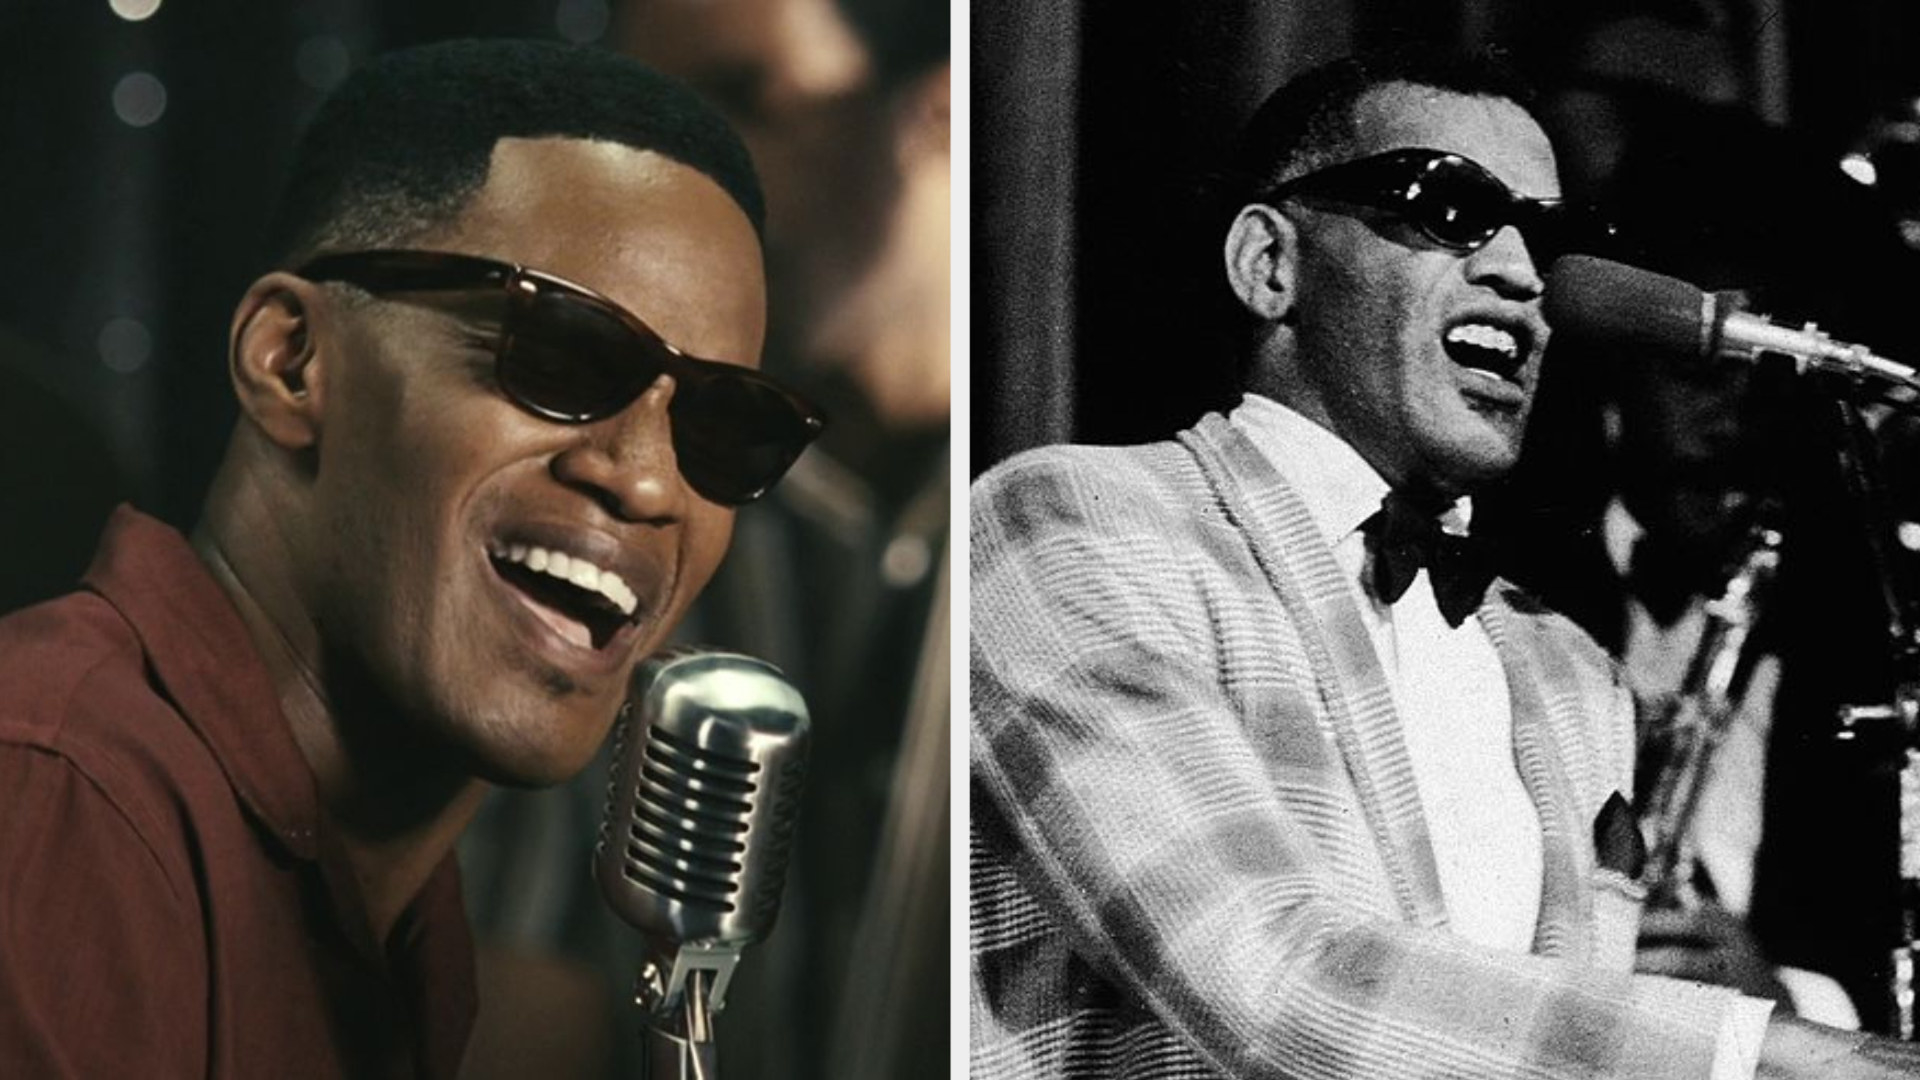 Jamie Foxx as Ray Charles, wearing sun glasses, singing happily into a microphone; Ray Charles wearing a suit and bowtie, sunglasses, and singing with a lot of feeling during a live performance